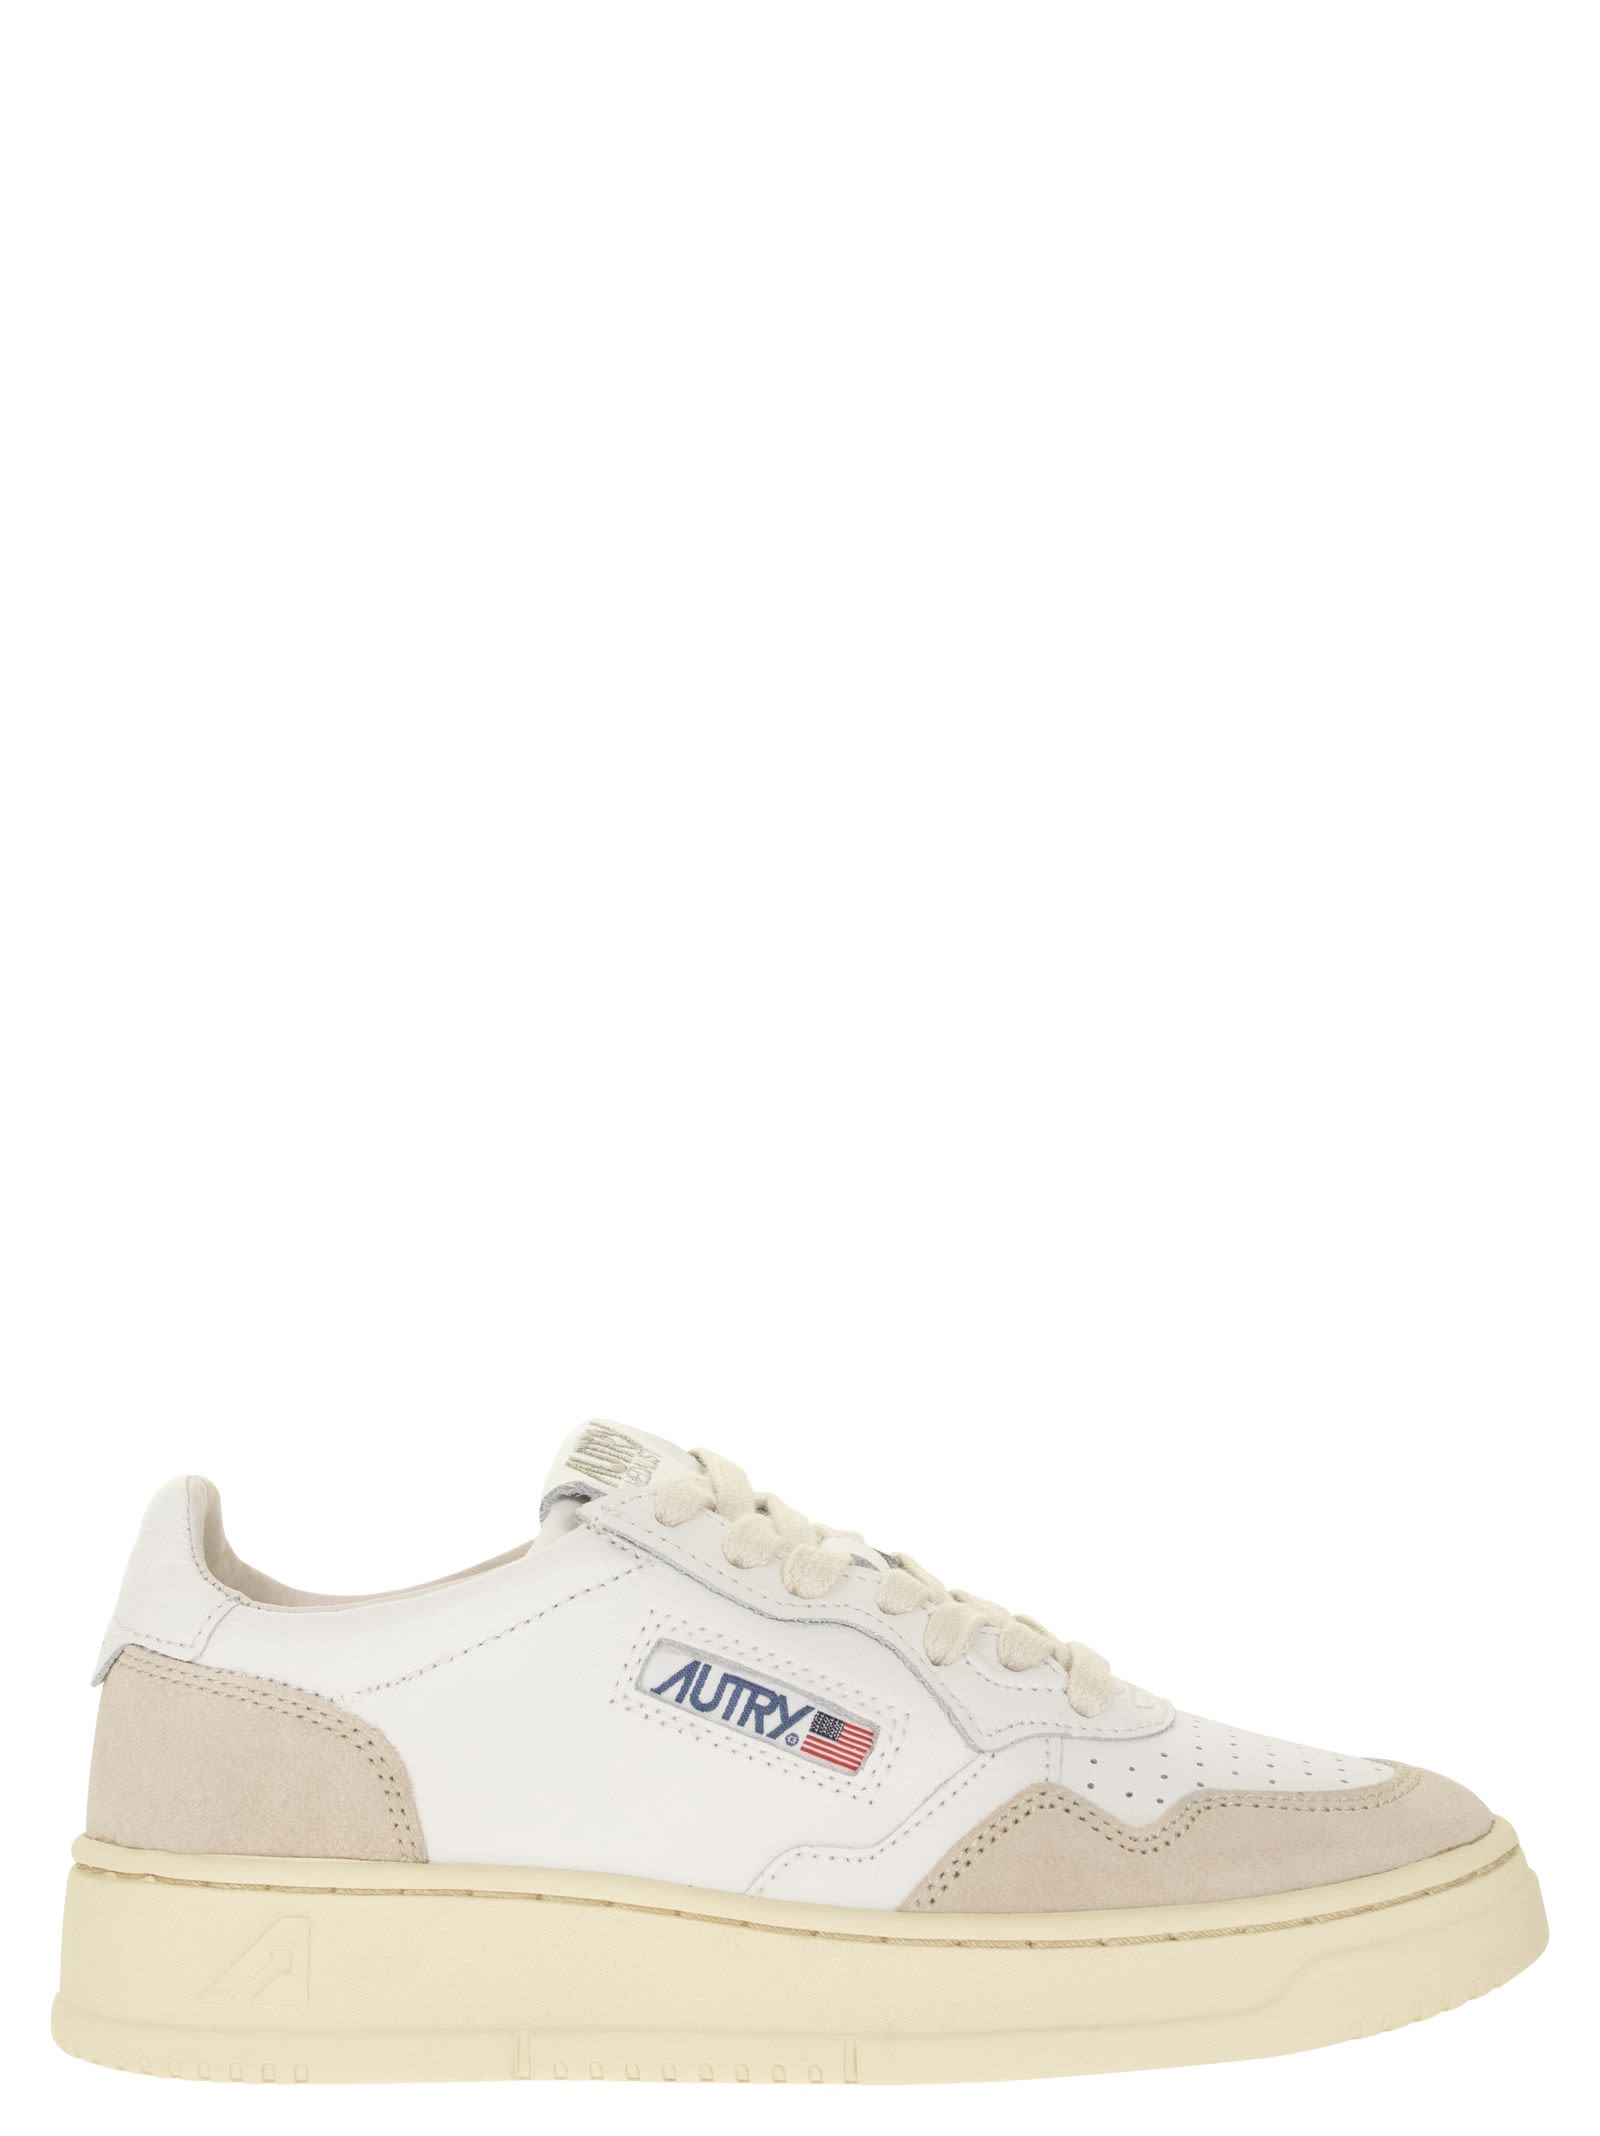 Autry Medalist Low - Leather And Suede Sneakers In White | ModeSens